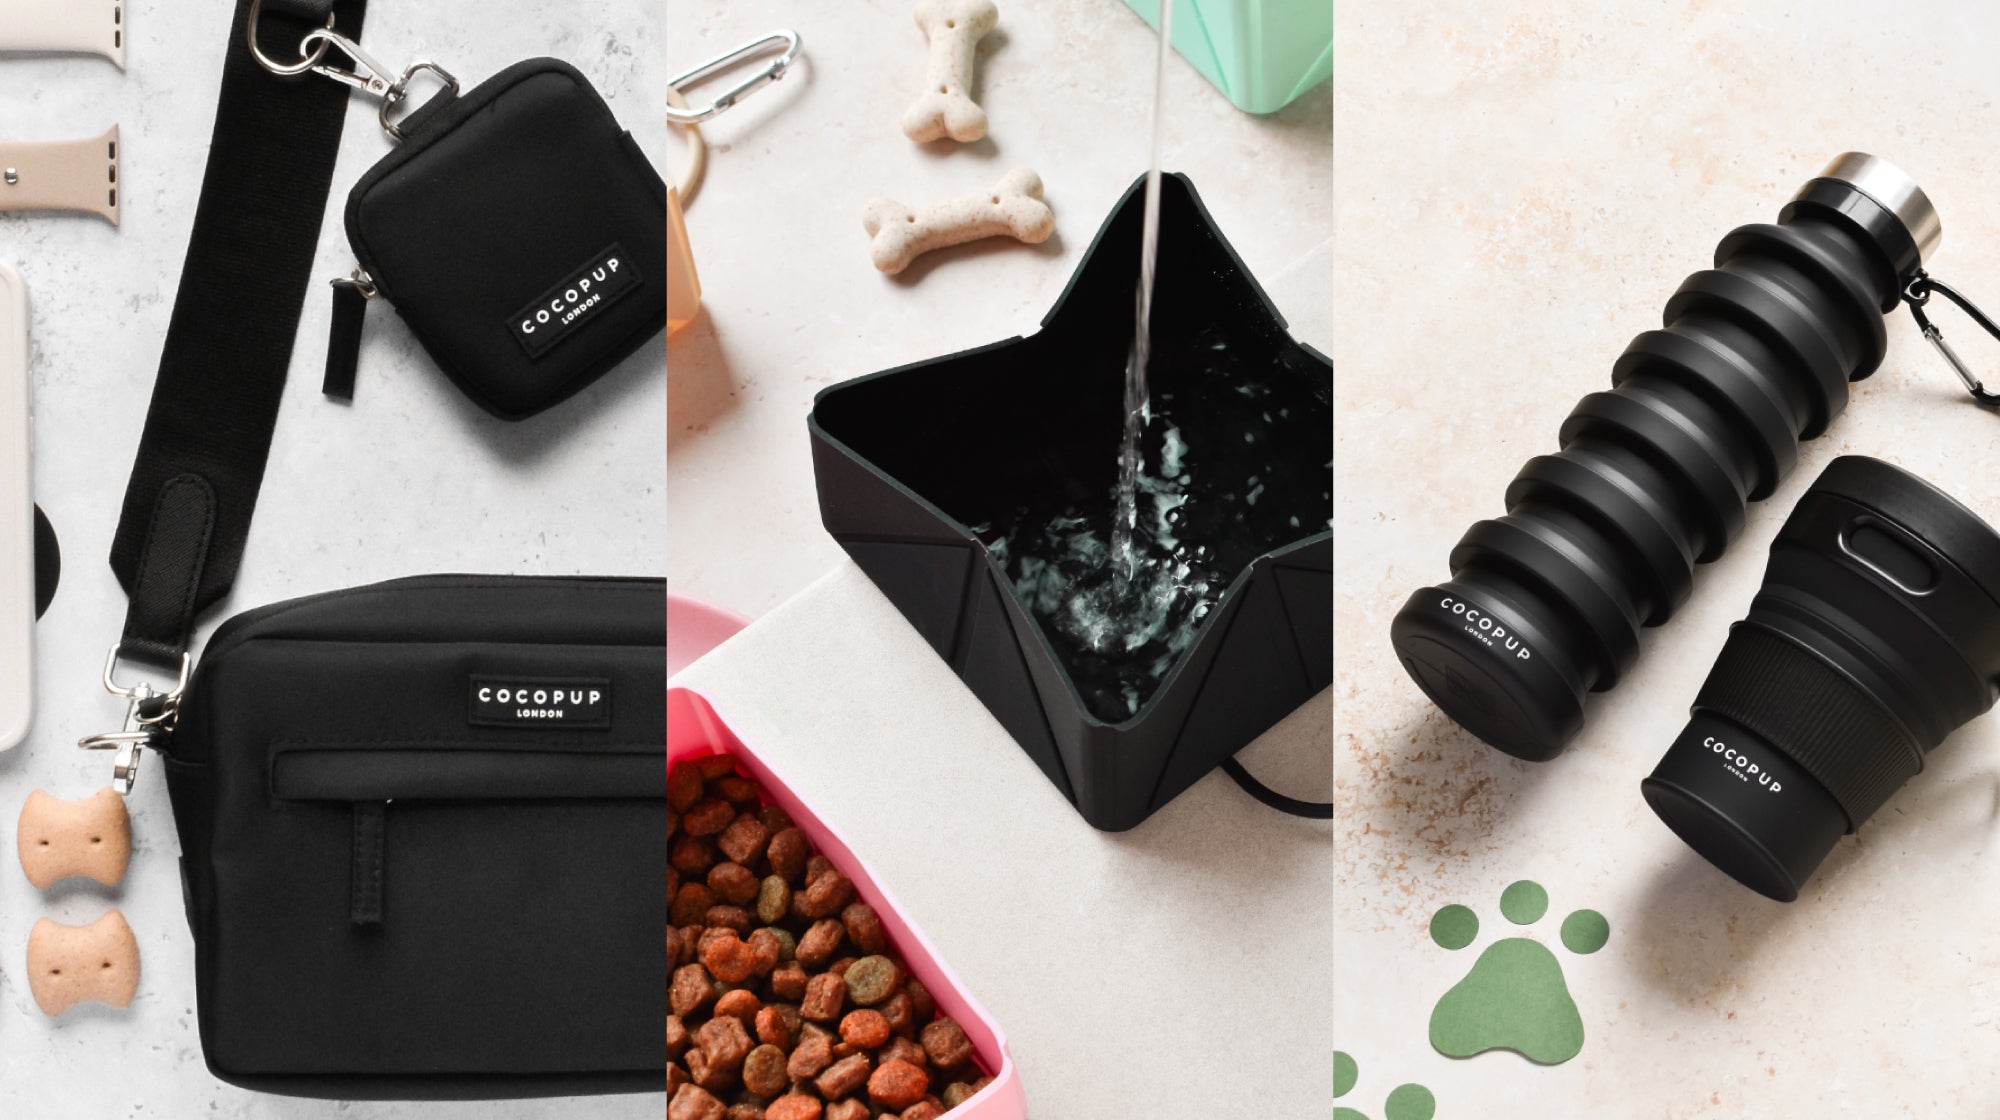 An image split into 3 columns, showcasing Cocopup products including Black Walking Bag Bundle, Black Travel Bowl and Black Collapsible Water Bottle